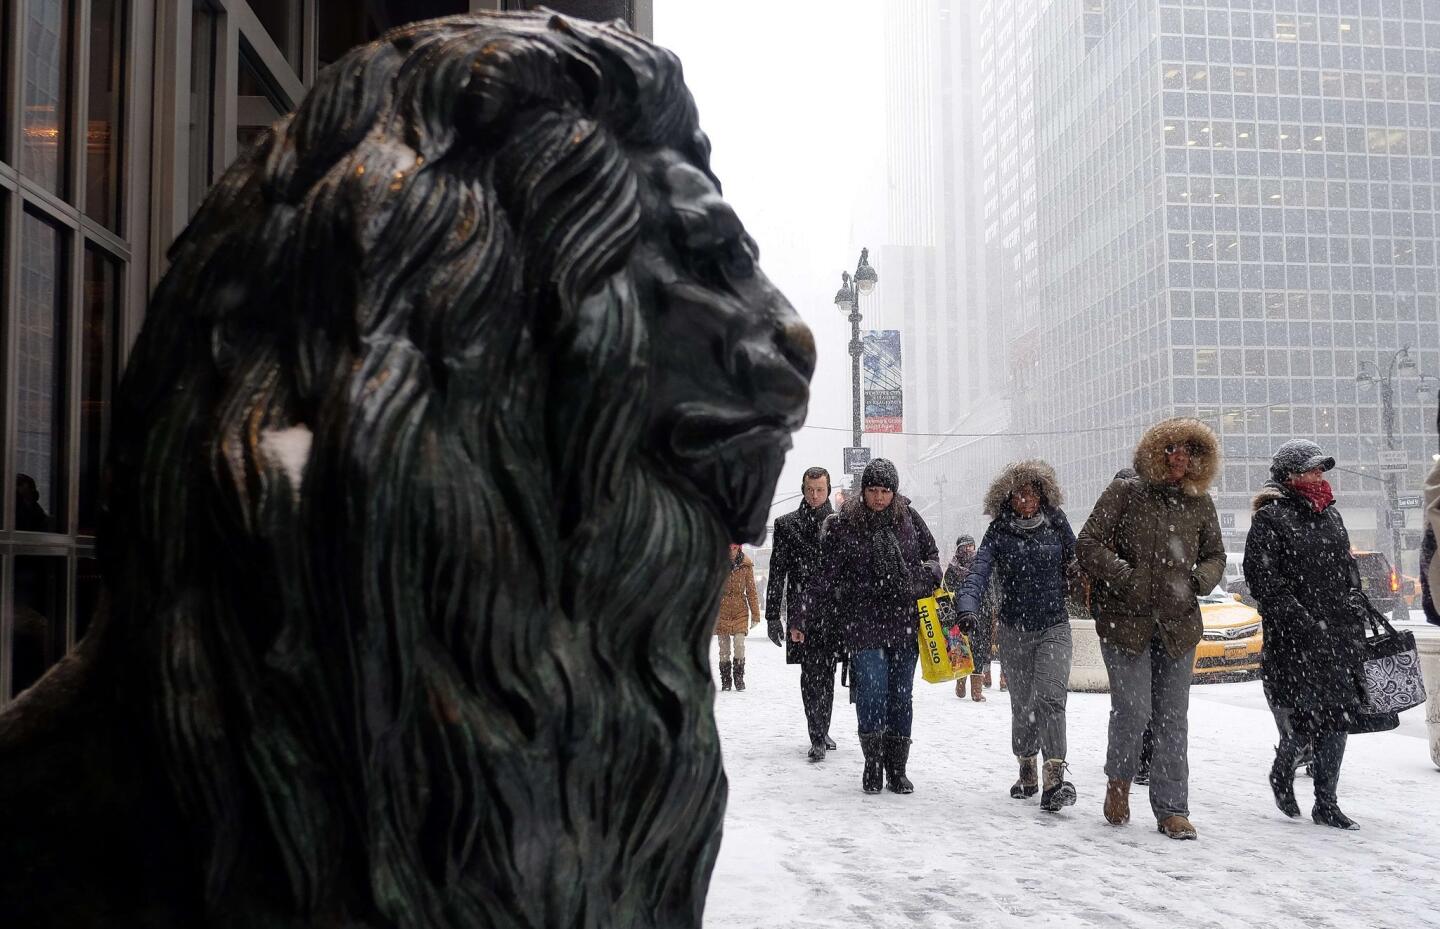 Stoic lion, stoic New Yorkers